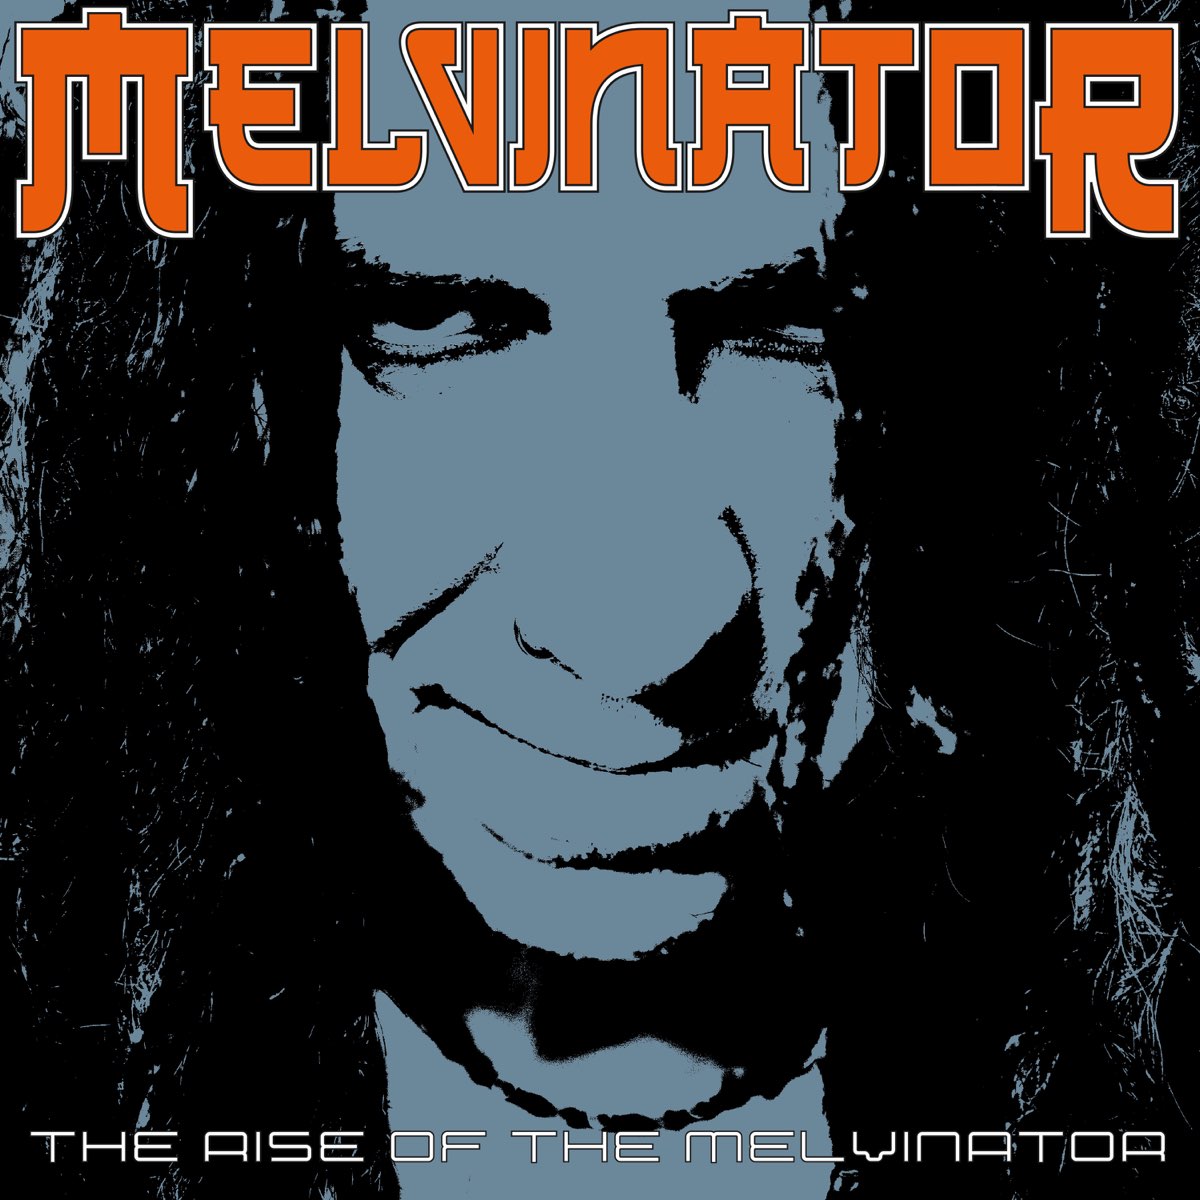 Melvinator – The Rise of the Melvinator (indus)